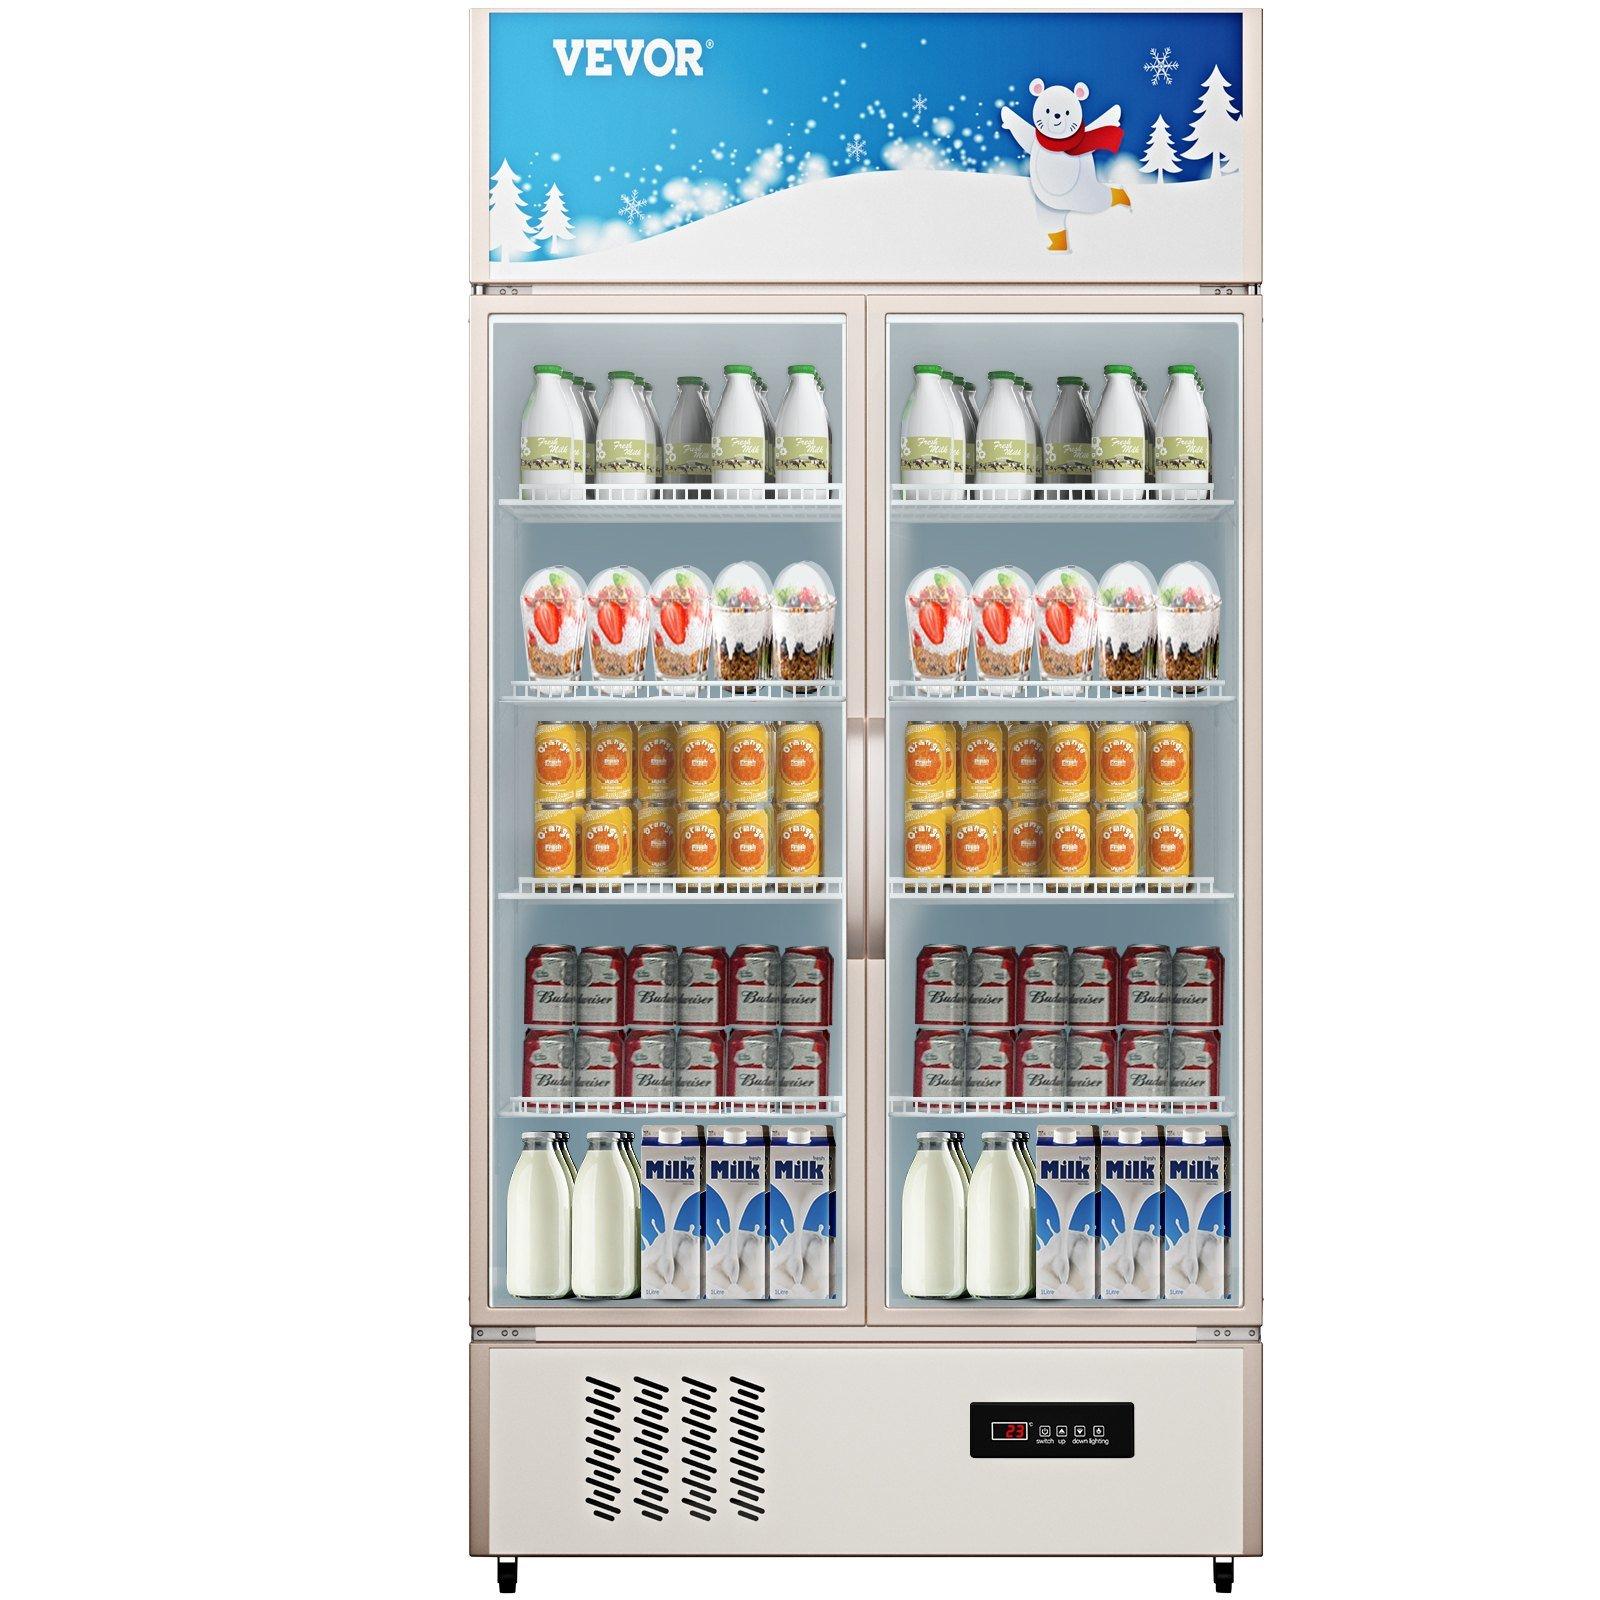 Refrigerator with drinks and milk inside